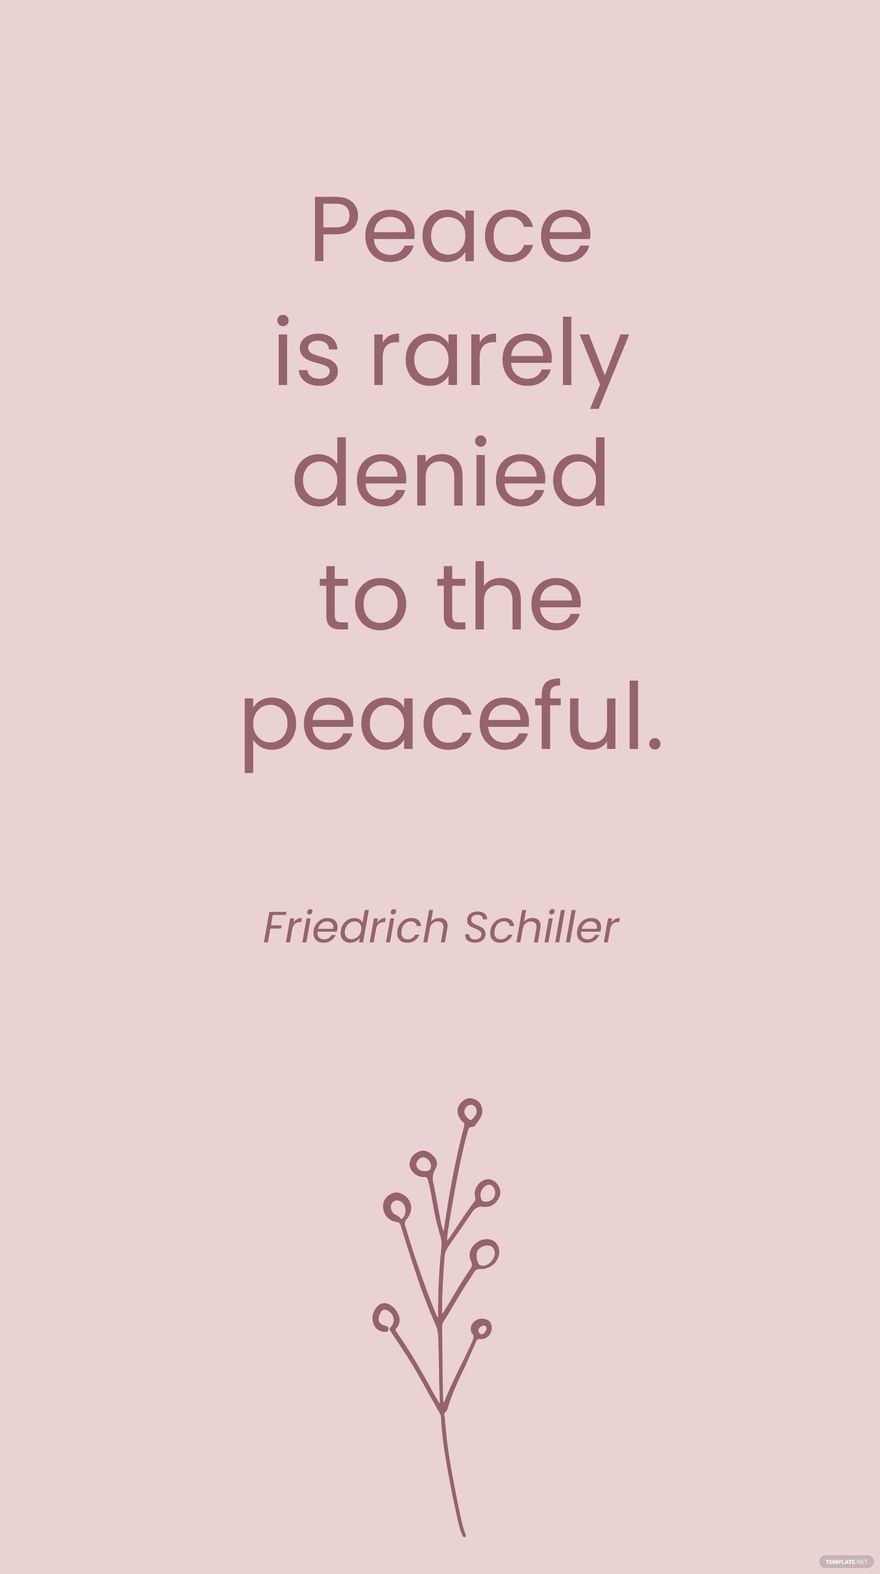 Friedrich Schiller - Peace is rarely denied to the peaceful.